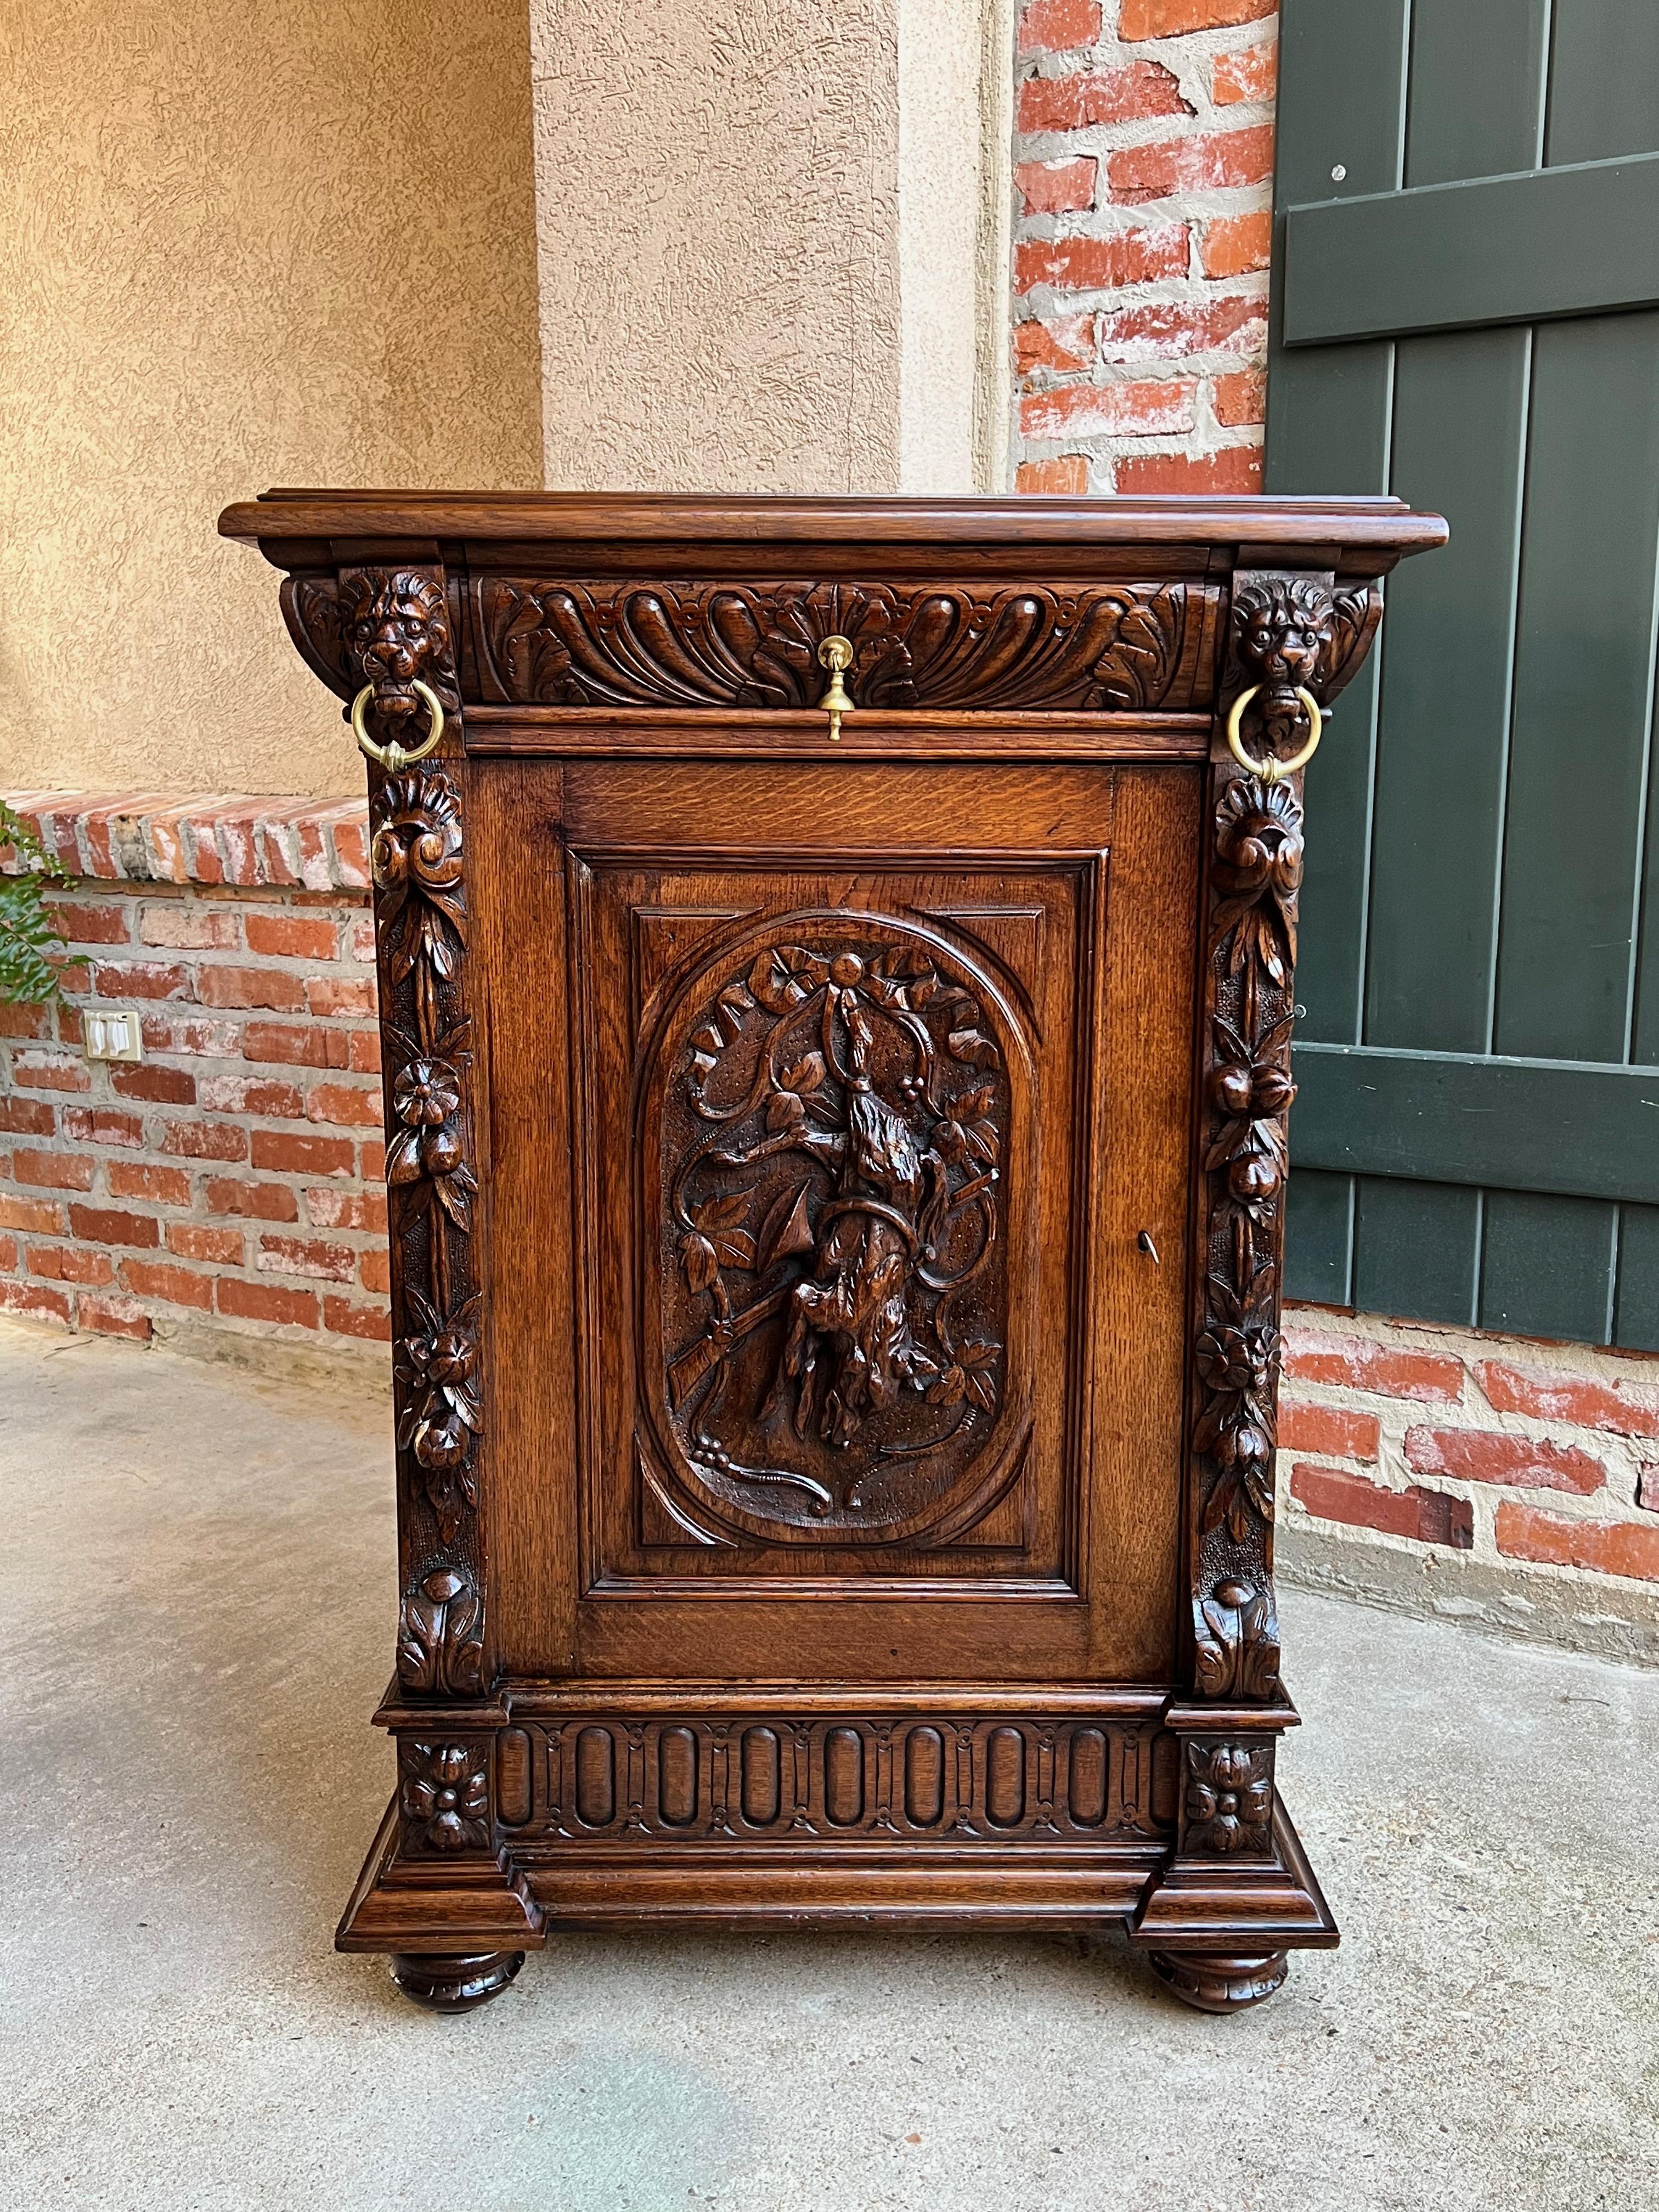 19th century French carved oak hunt cabinet Confiturier Black Forest fox.

Directly imported from France, a beautifully hand carved 19th century French confiturier cabinet, in a versatile size, perfect for placement in any room and a customer